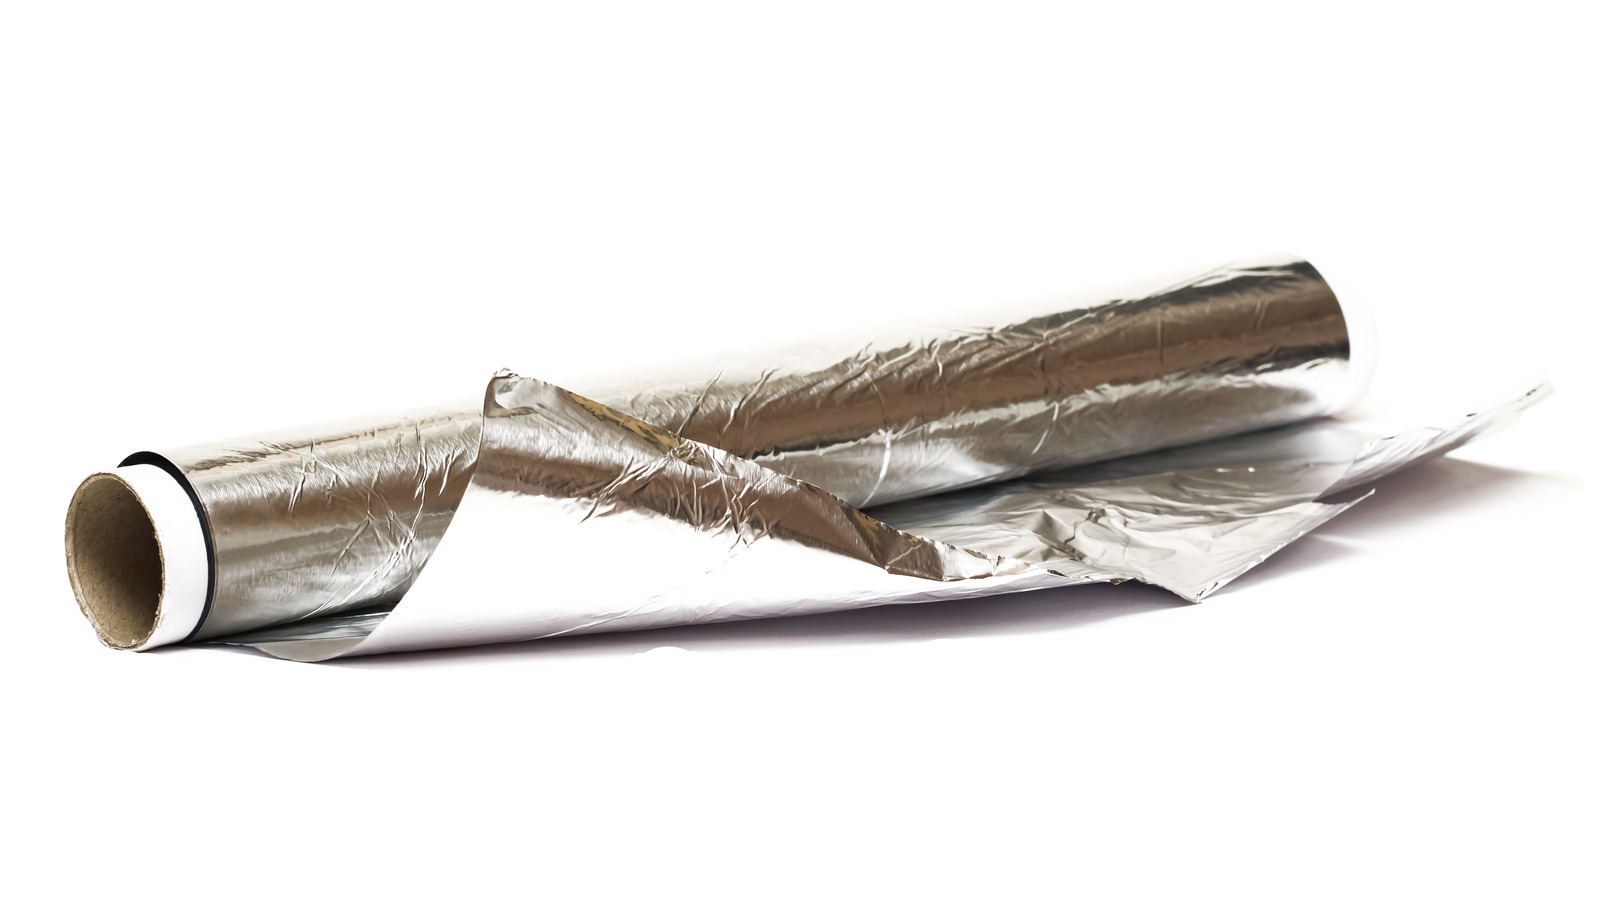 https://www.thedailymeal.com/img/gallery/this-genius-method-for-fixing-an-uneven-aluminum-foil-roll-requires-no-tools/l-intro-1689965526.jpg